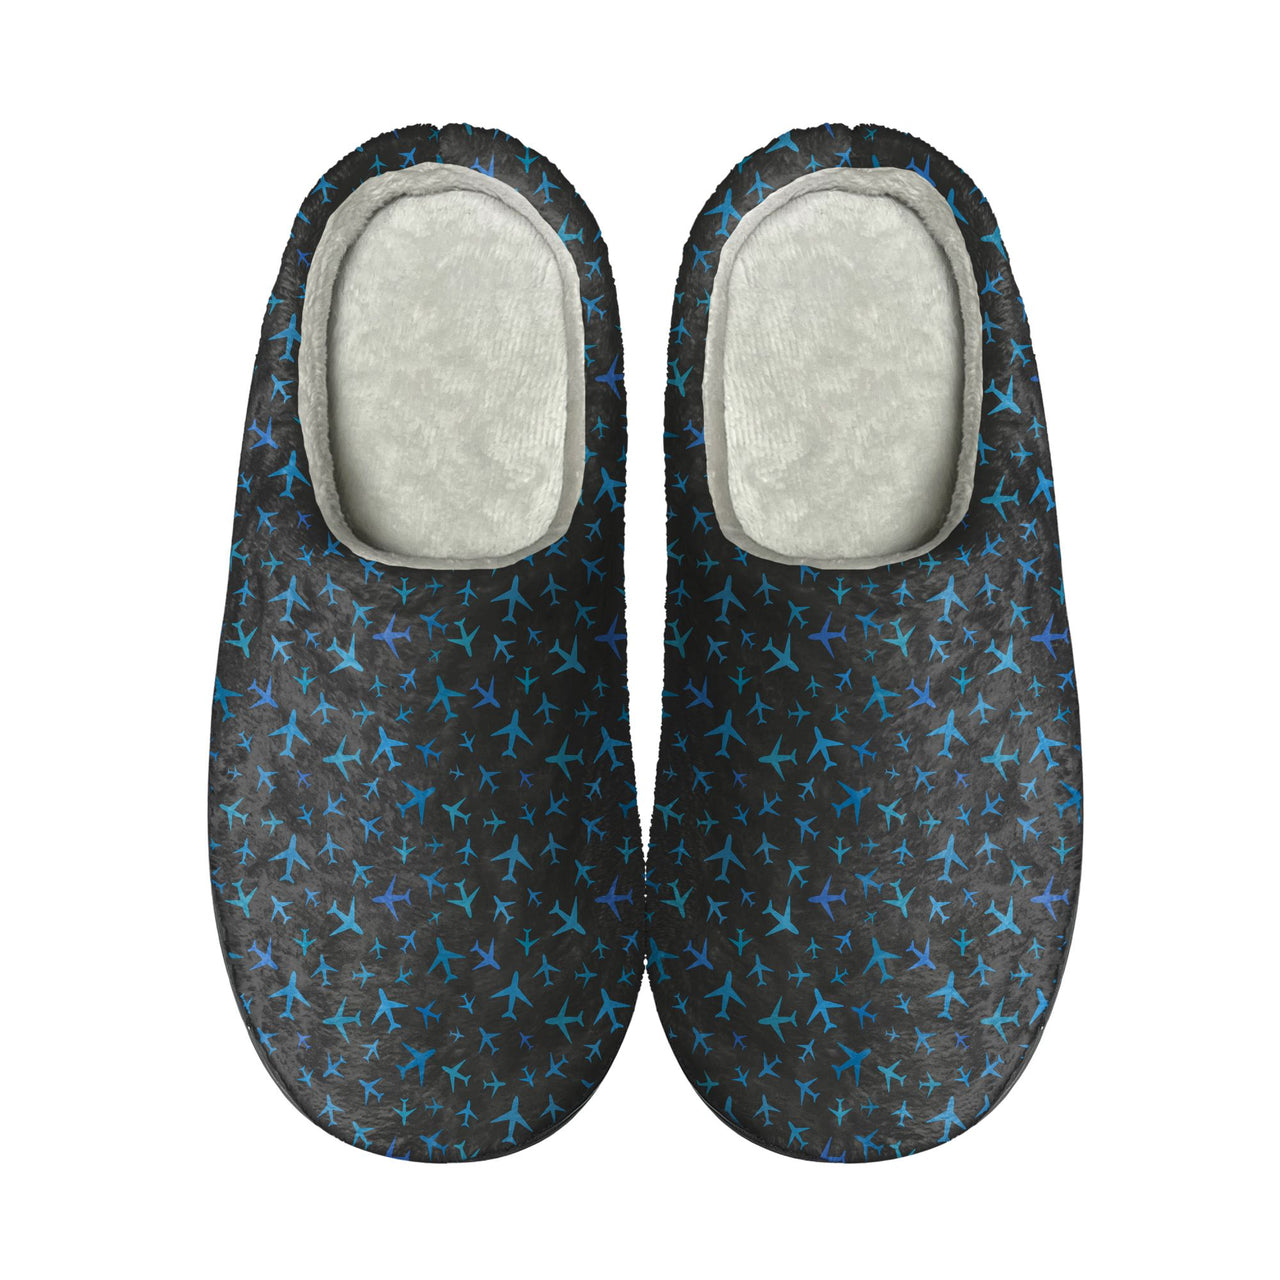 Many Airplanes Gray Designed Cotton Slippers